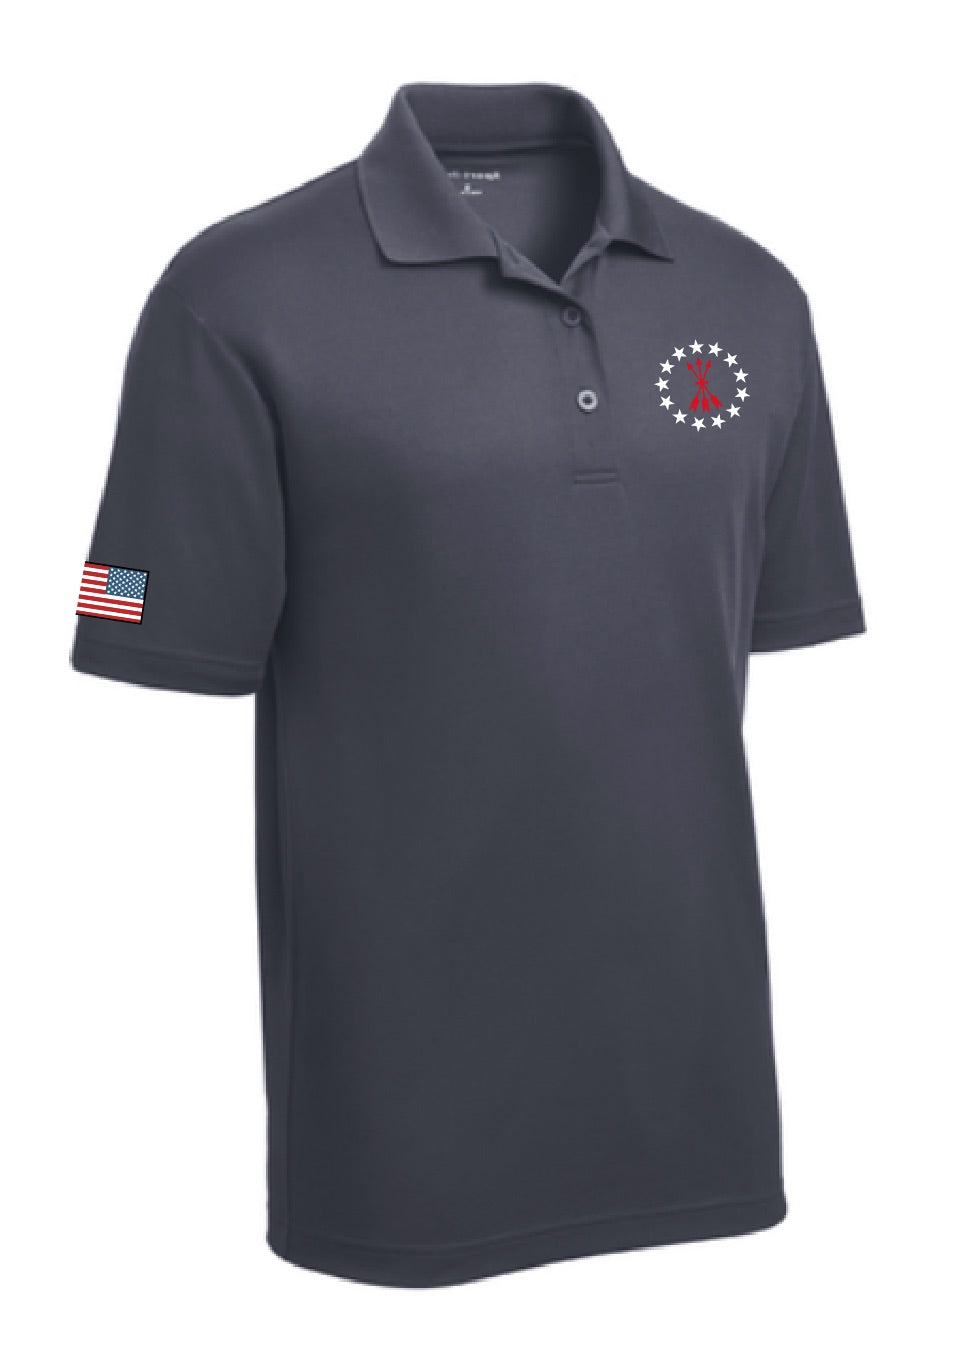 Mens Polo - Steel Gray with Arrows and Stars